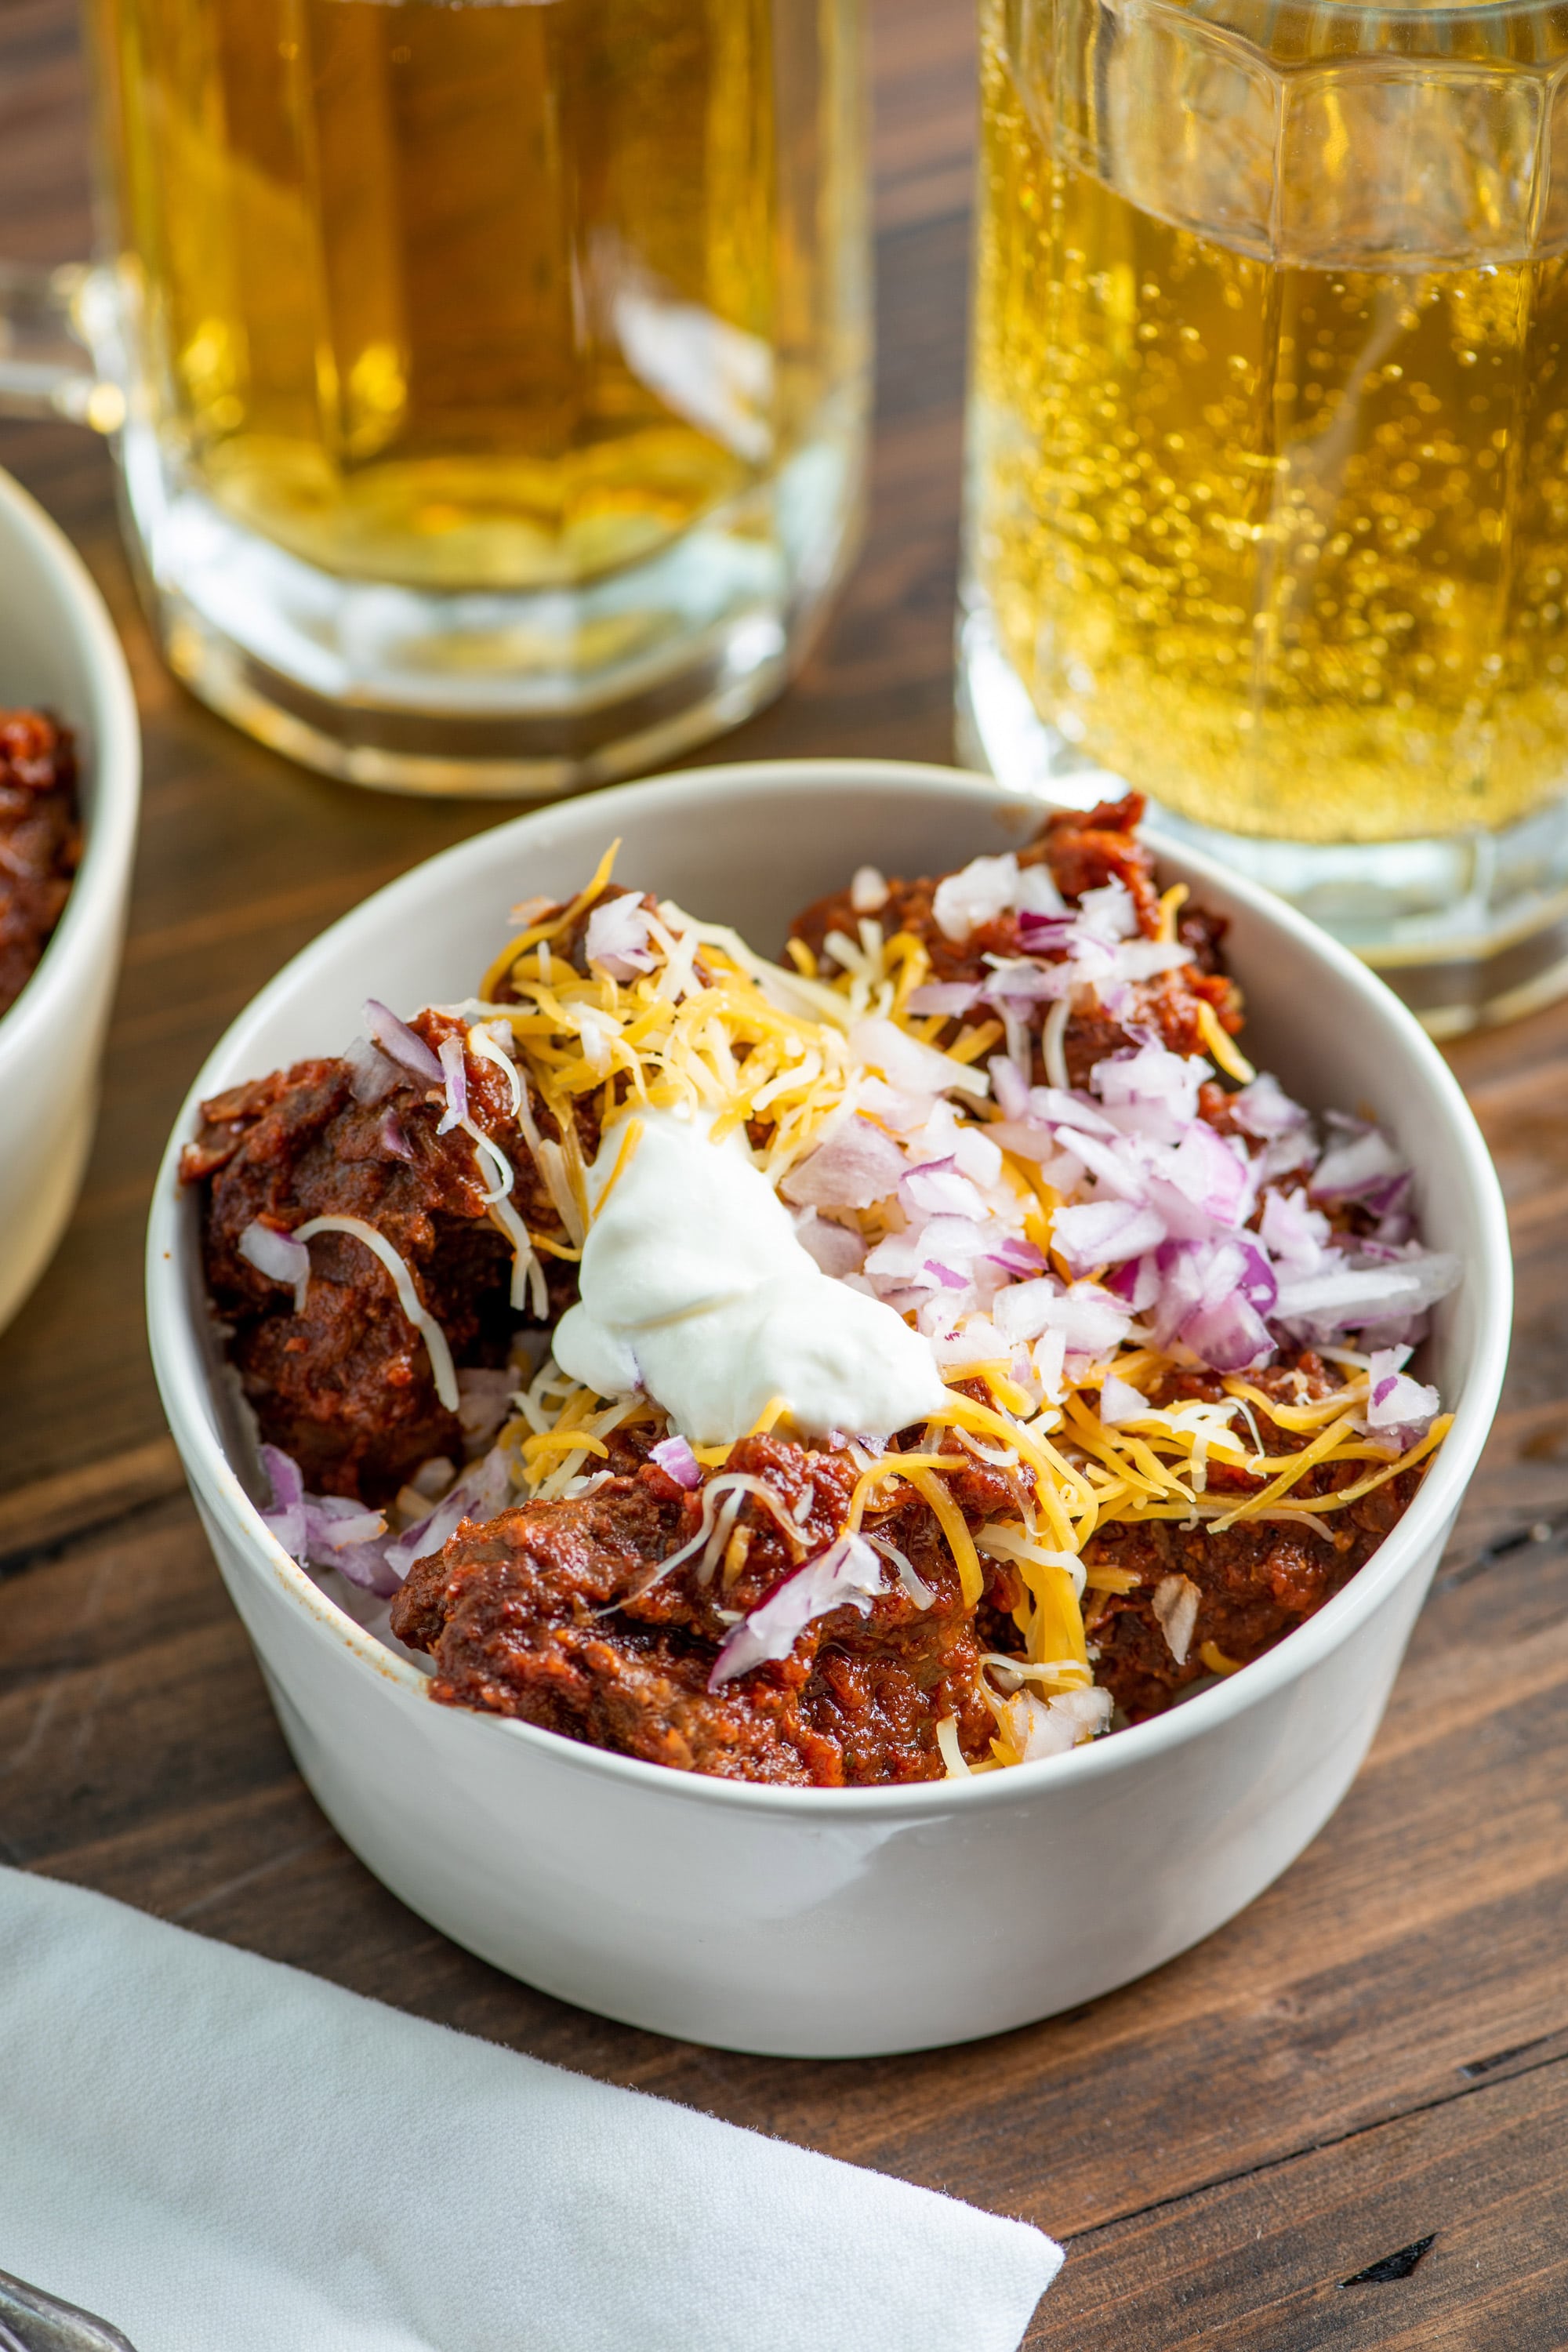 Bowl of Texas chili on table with glasses of beer.